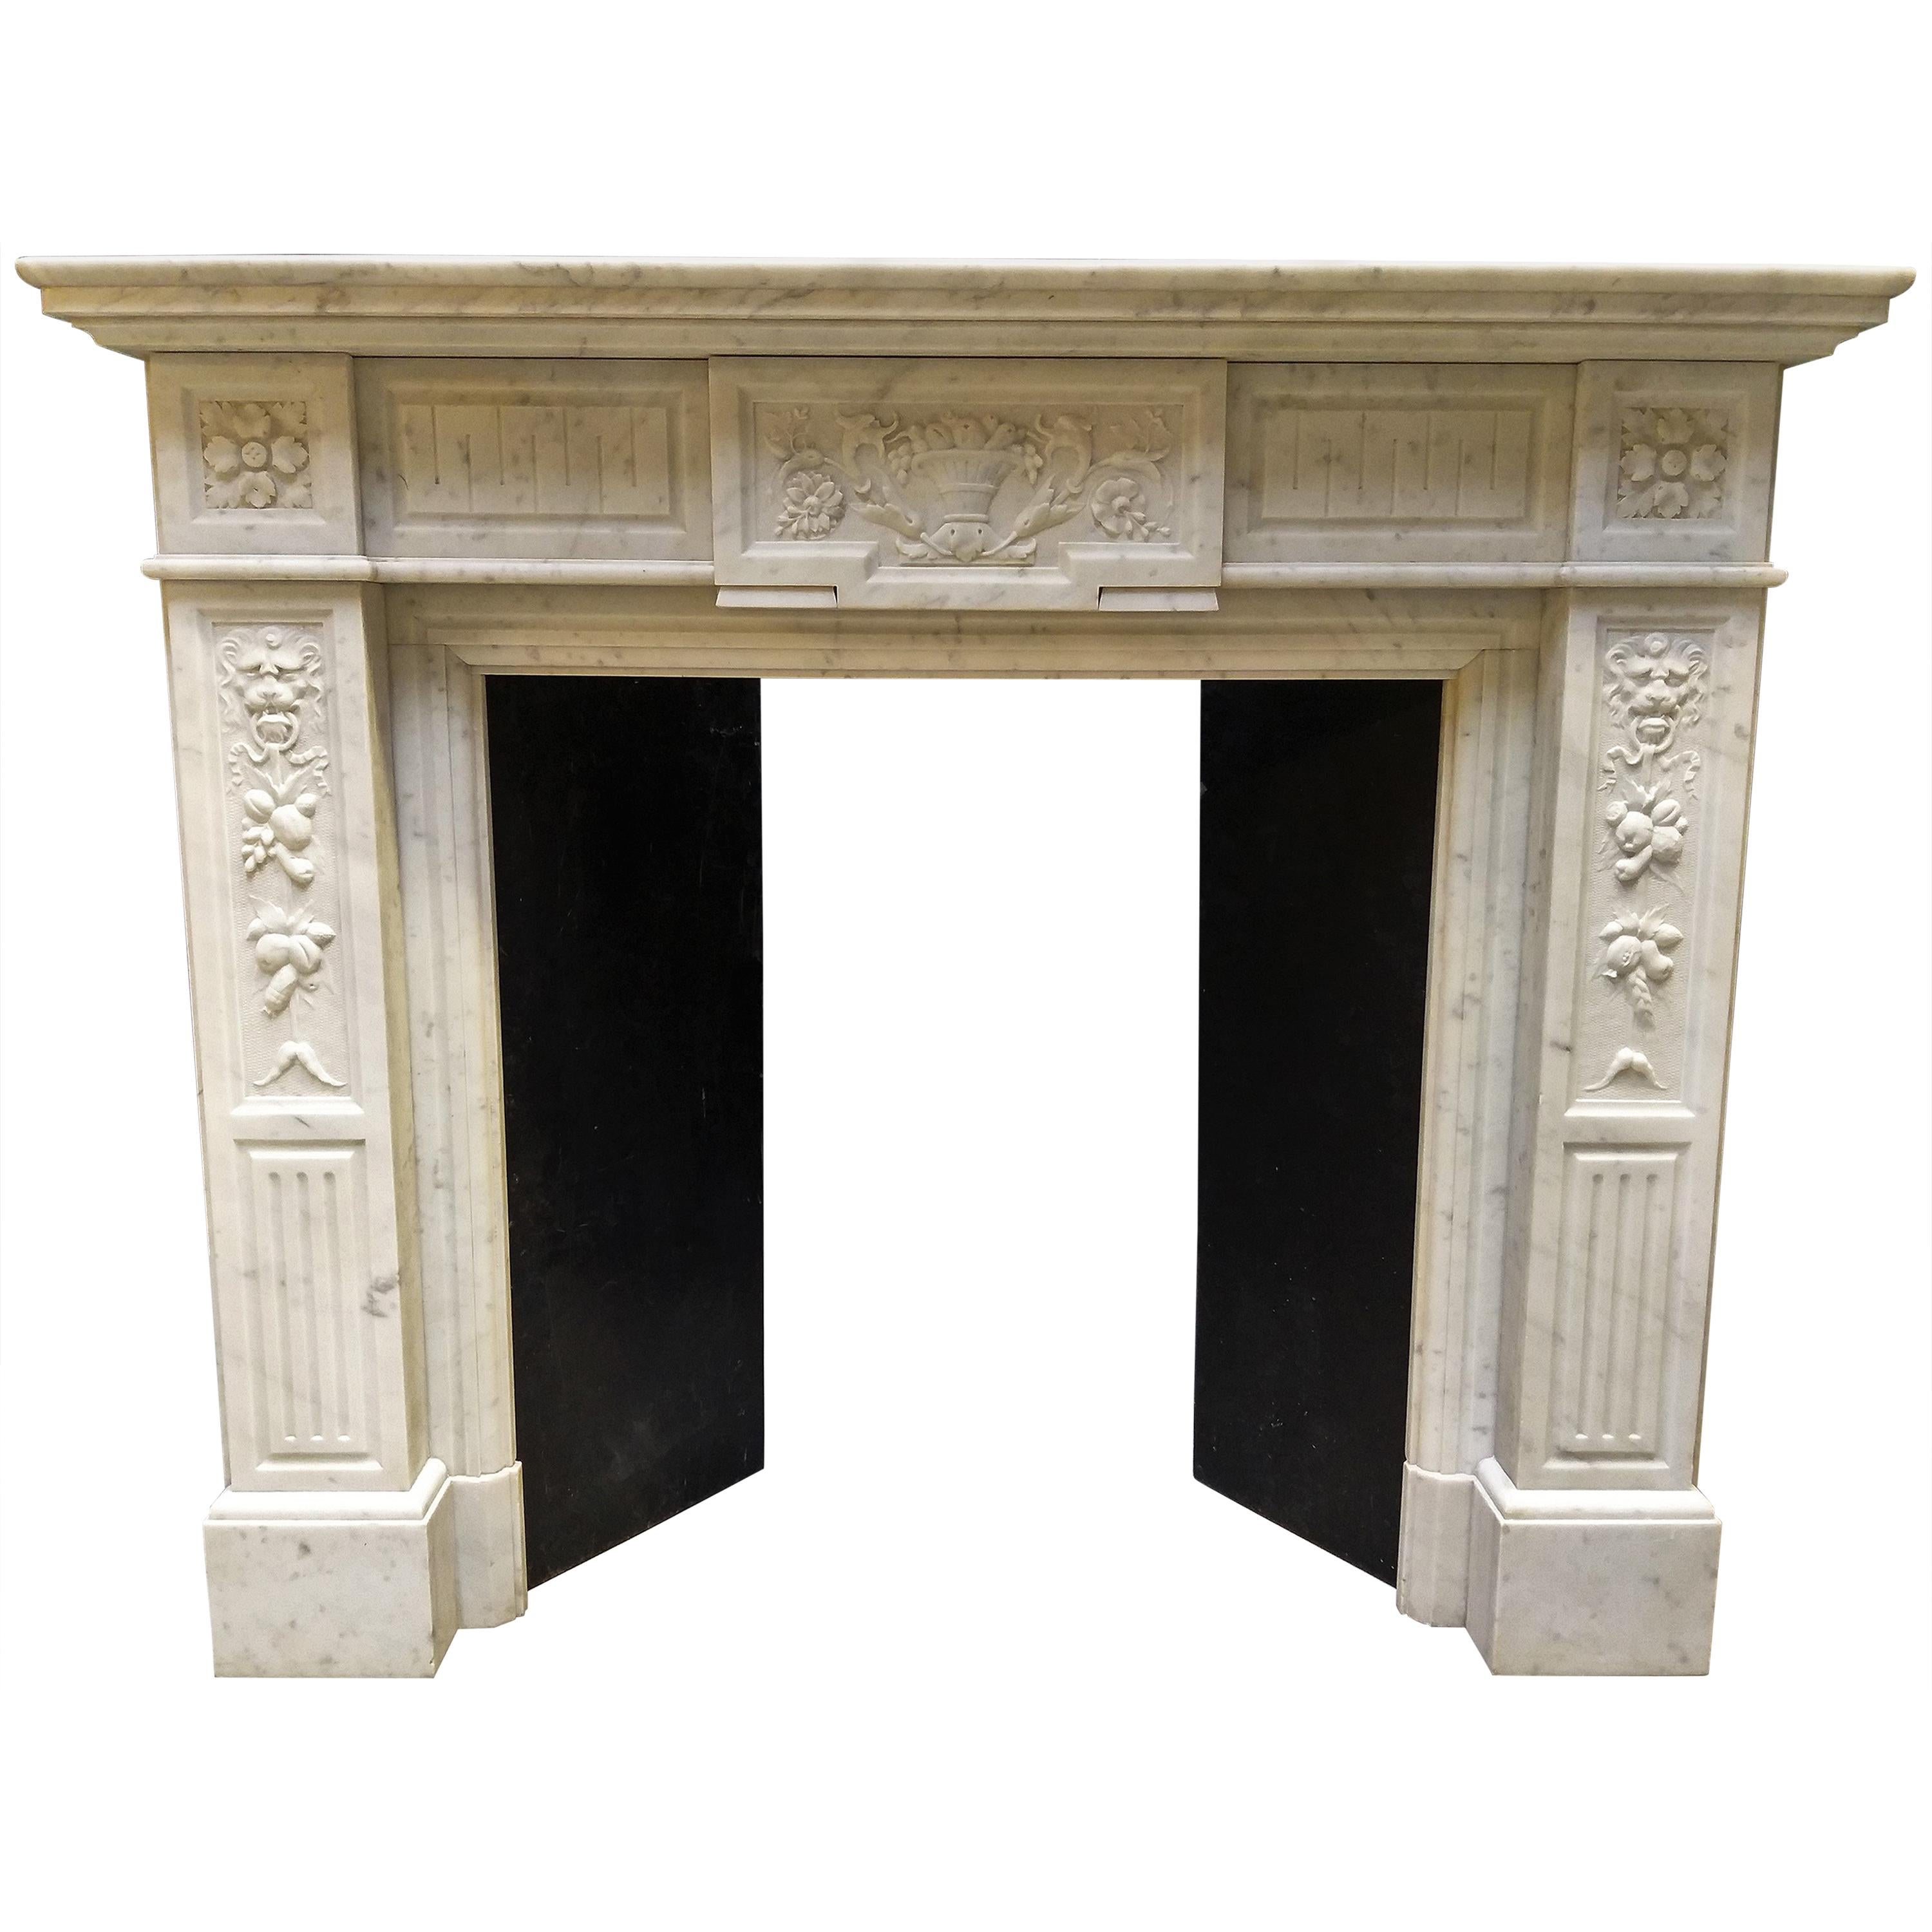 Neo-classical Fireplace in Carrara Marble, Late 19th Century For Sale